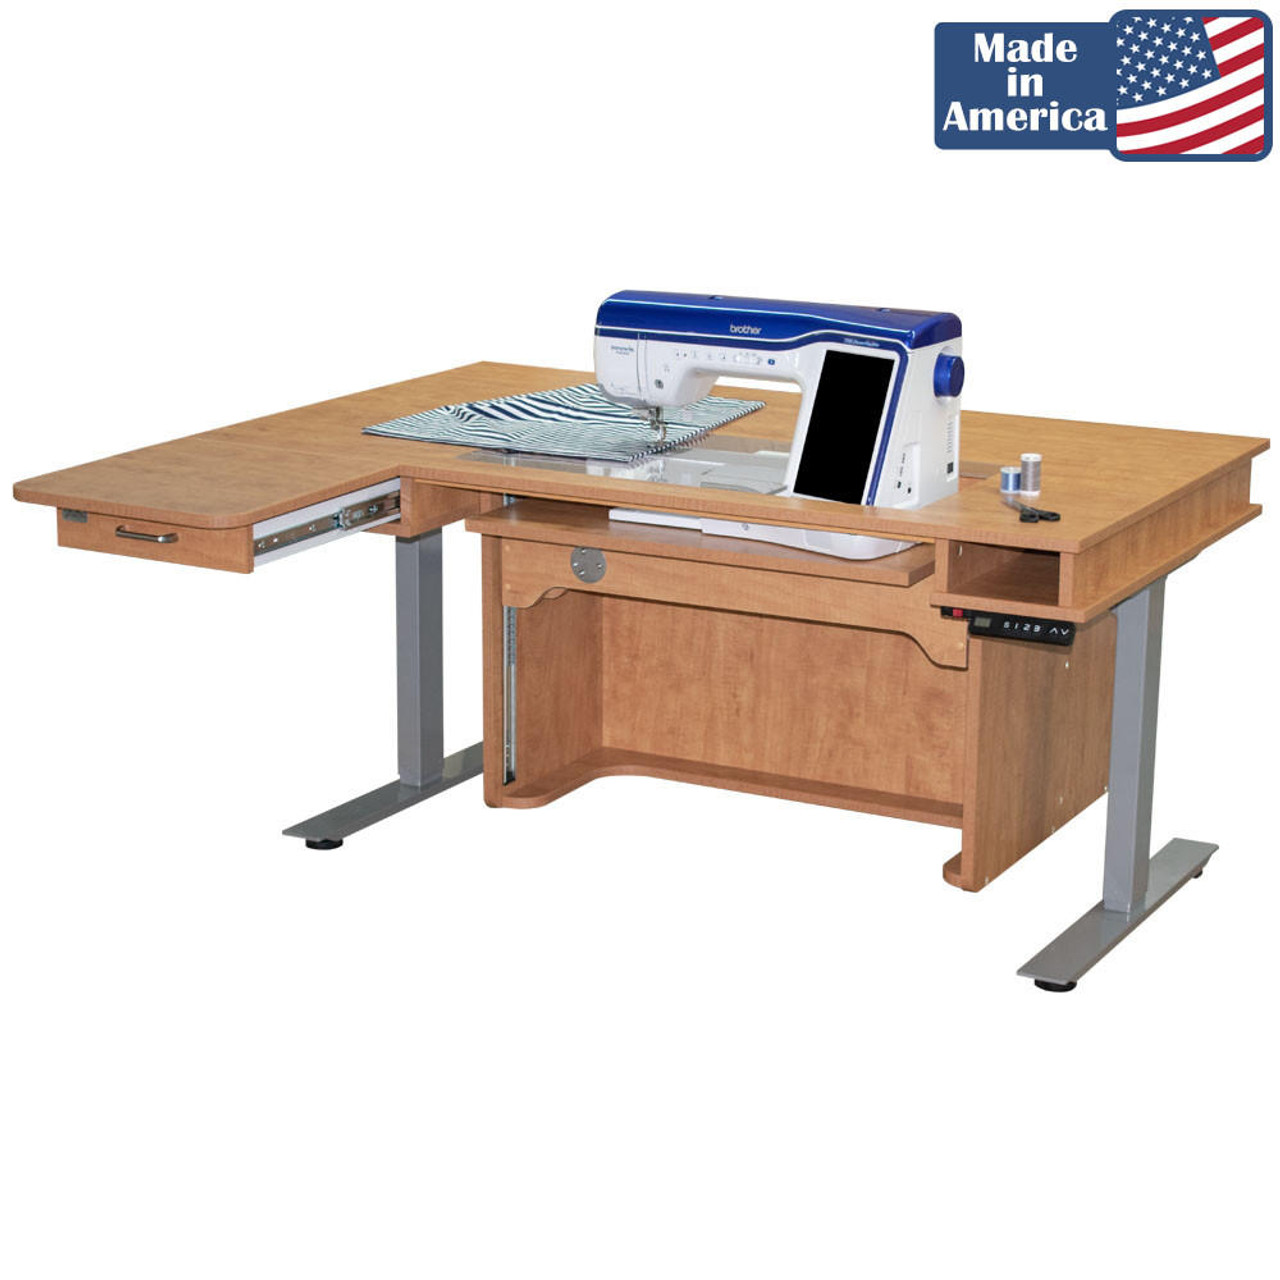 Horn New Heights Model 9000 Height Adjustable Sewing Table in Sunrise Maple